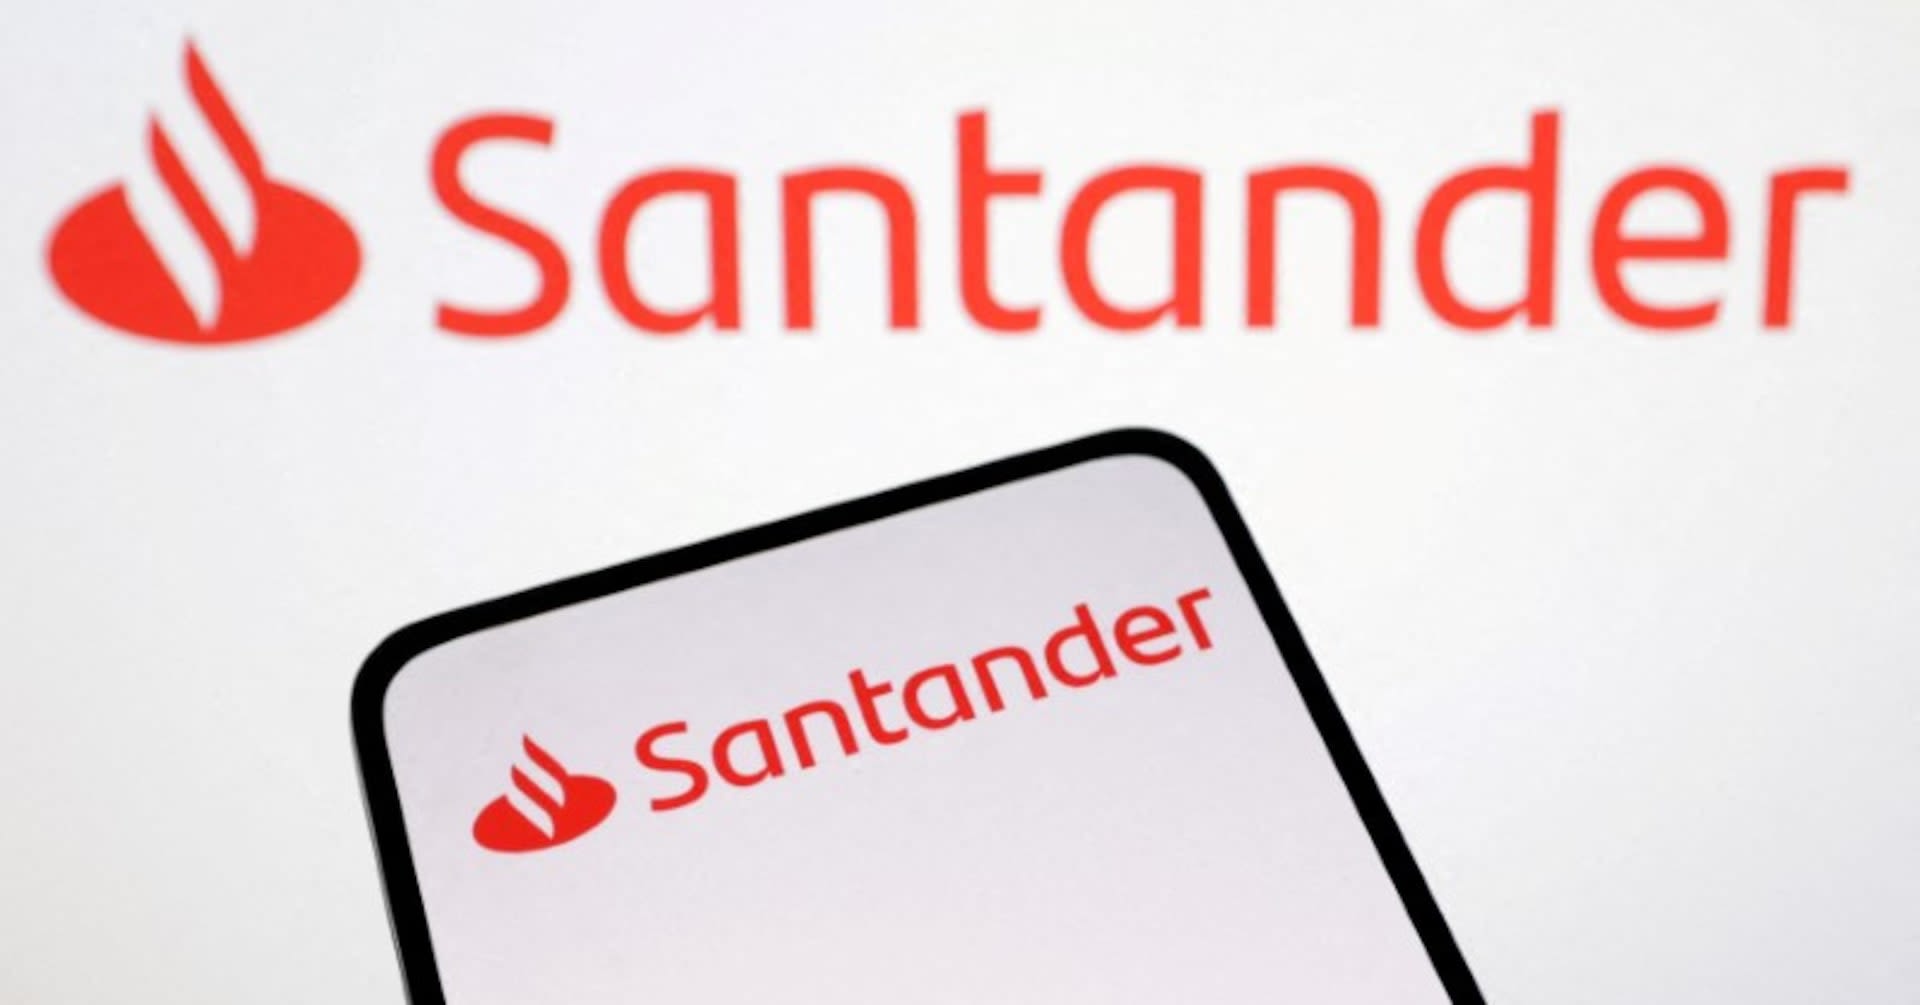 Exclusive: Santander's Matarranz to step down as global wealth chief as unit expands, sources say